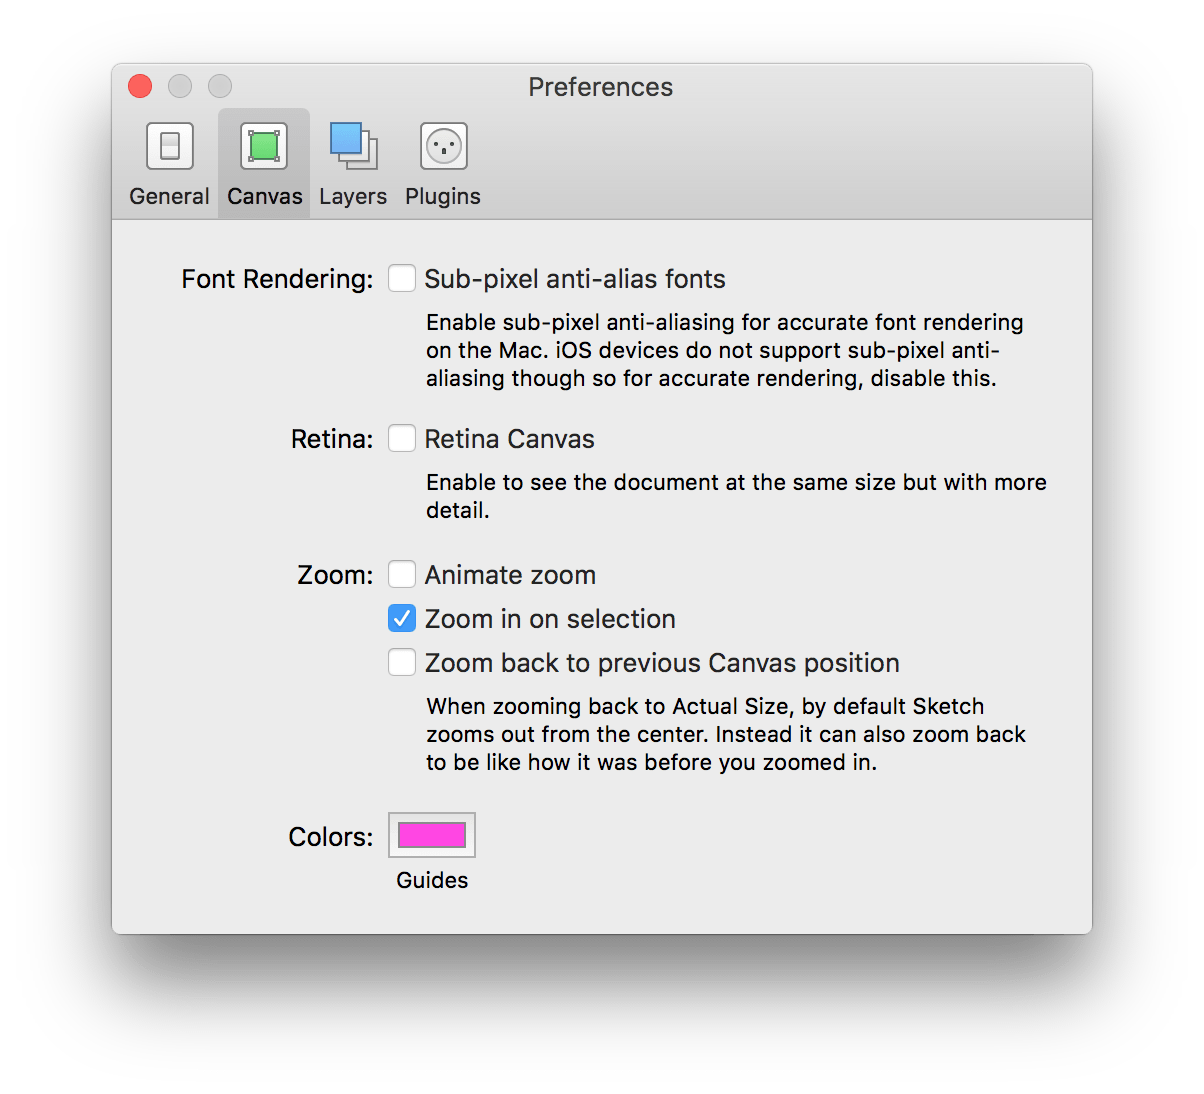 The Retina Canvas checkbox has removed from preferences since it was a confusing setting